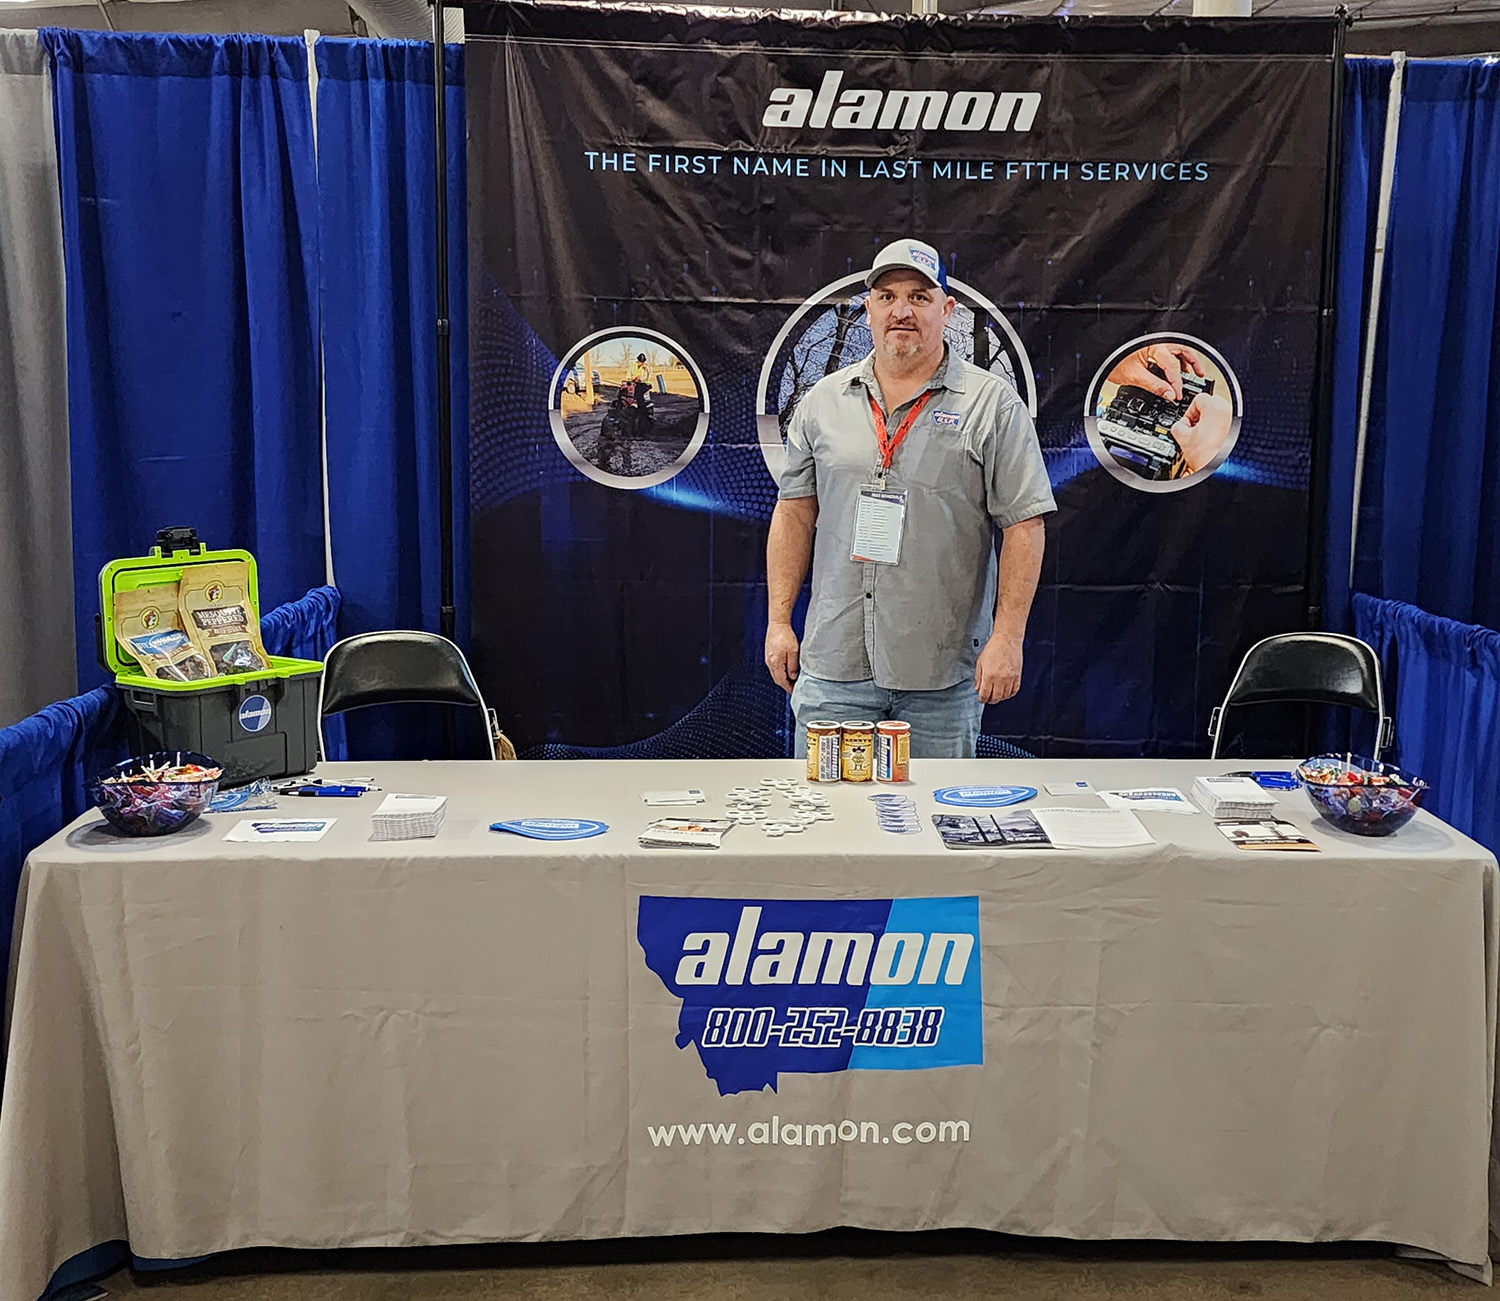 Visit Alamon in booth 603 at the Texas Communications Expo